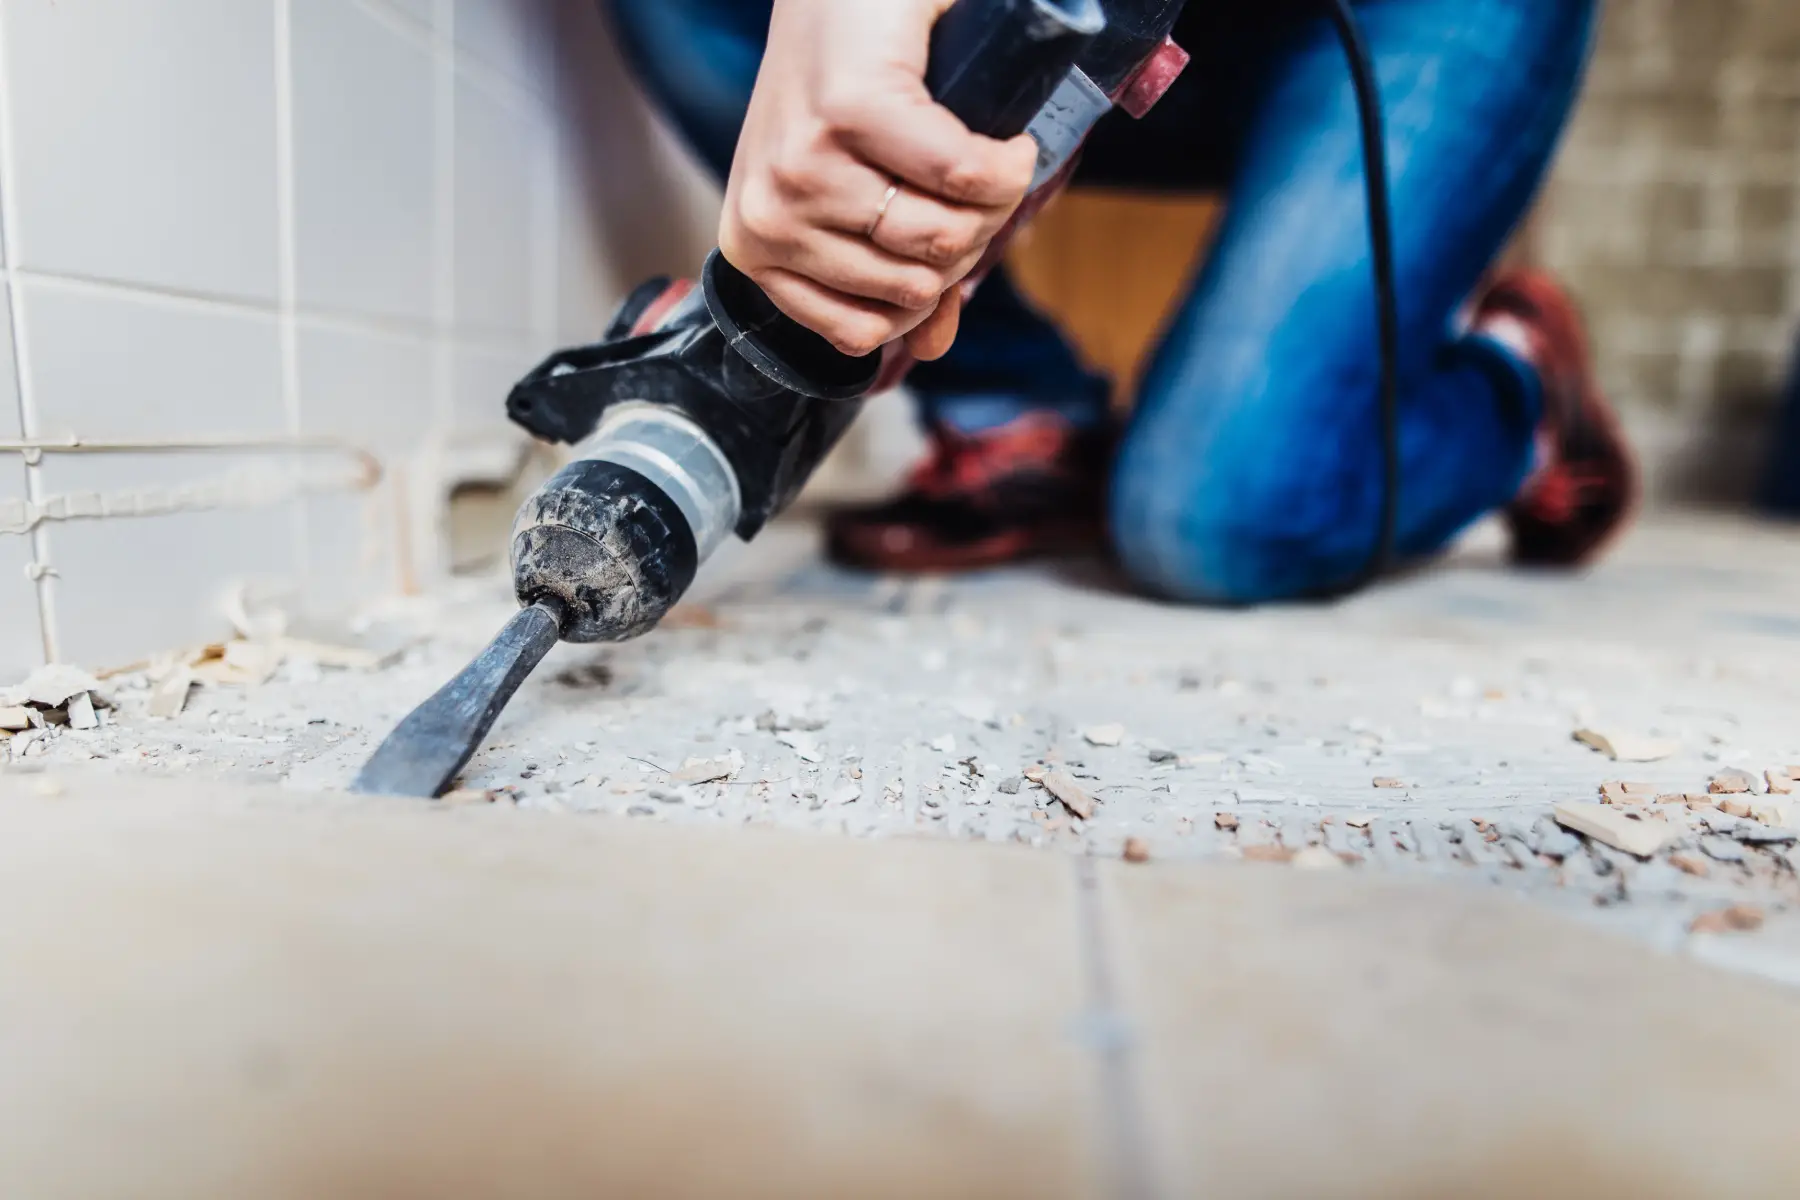 a close-up shot of someone removing old tiles from a floor using a heavy piece of equipment 